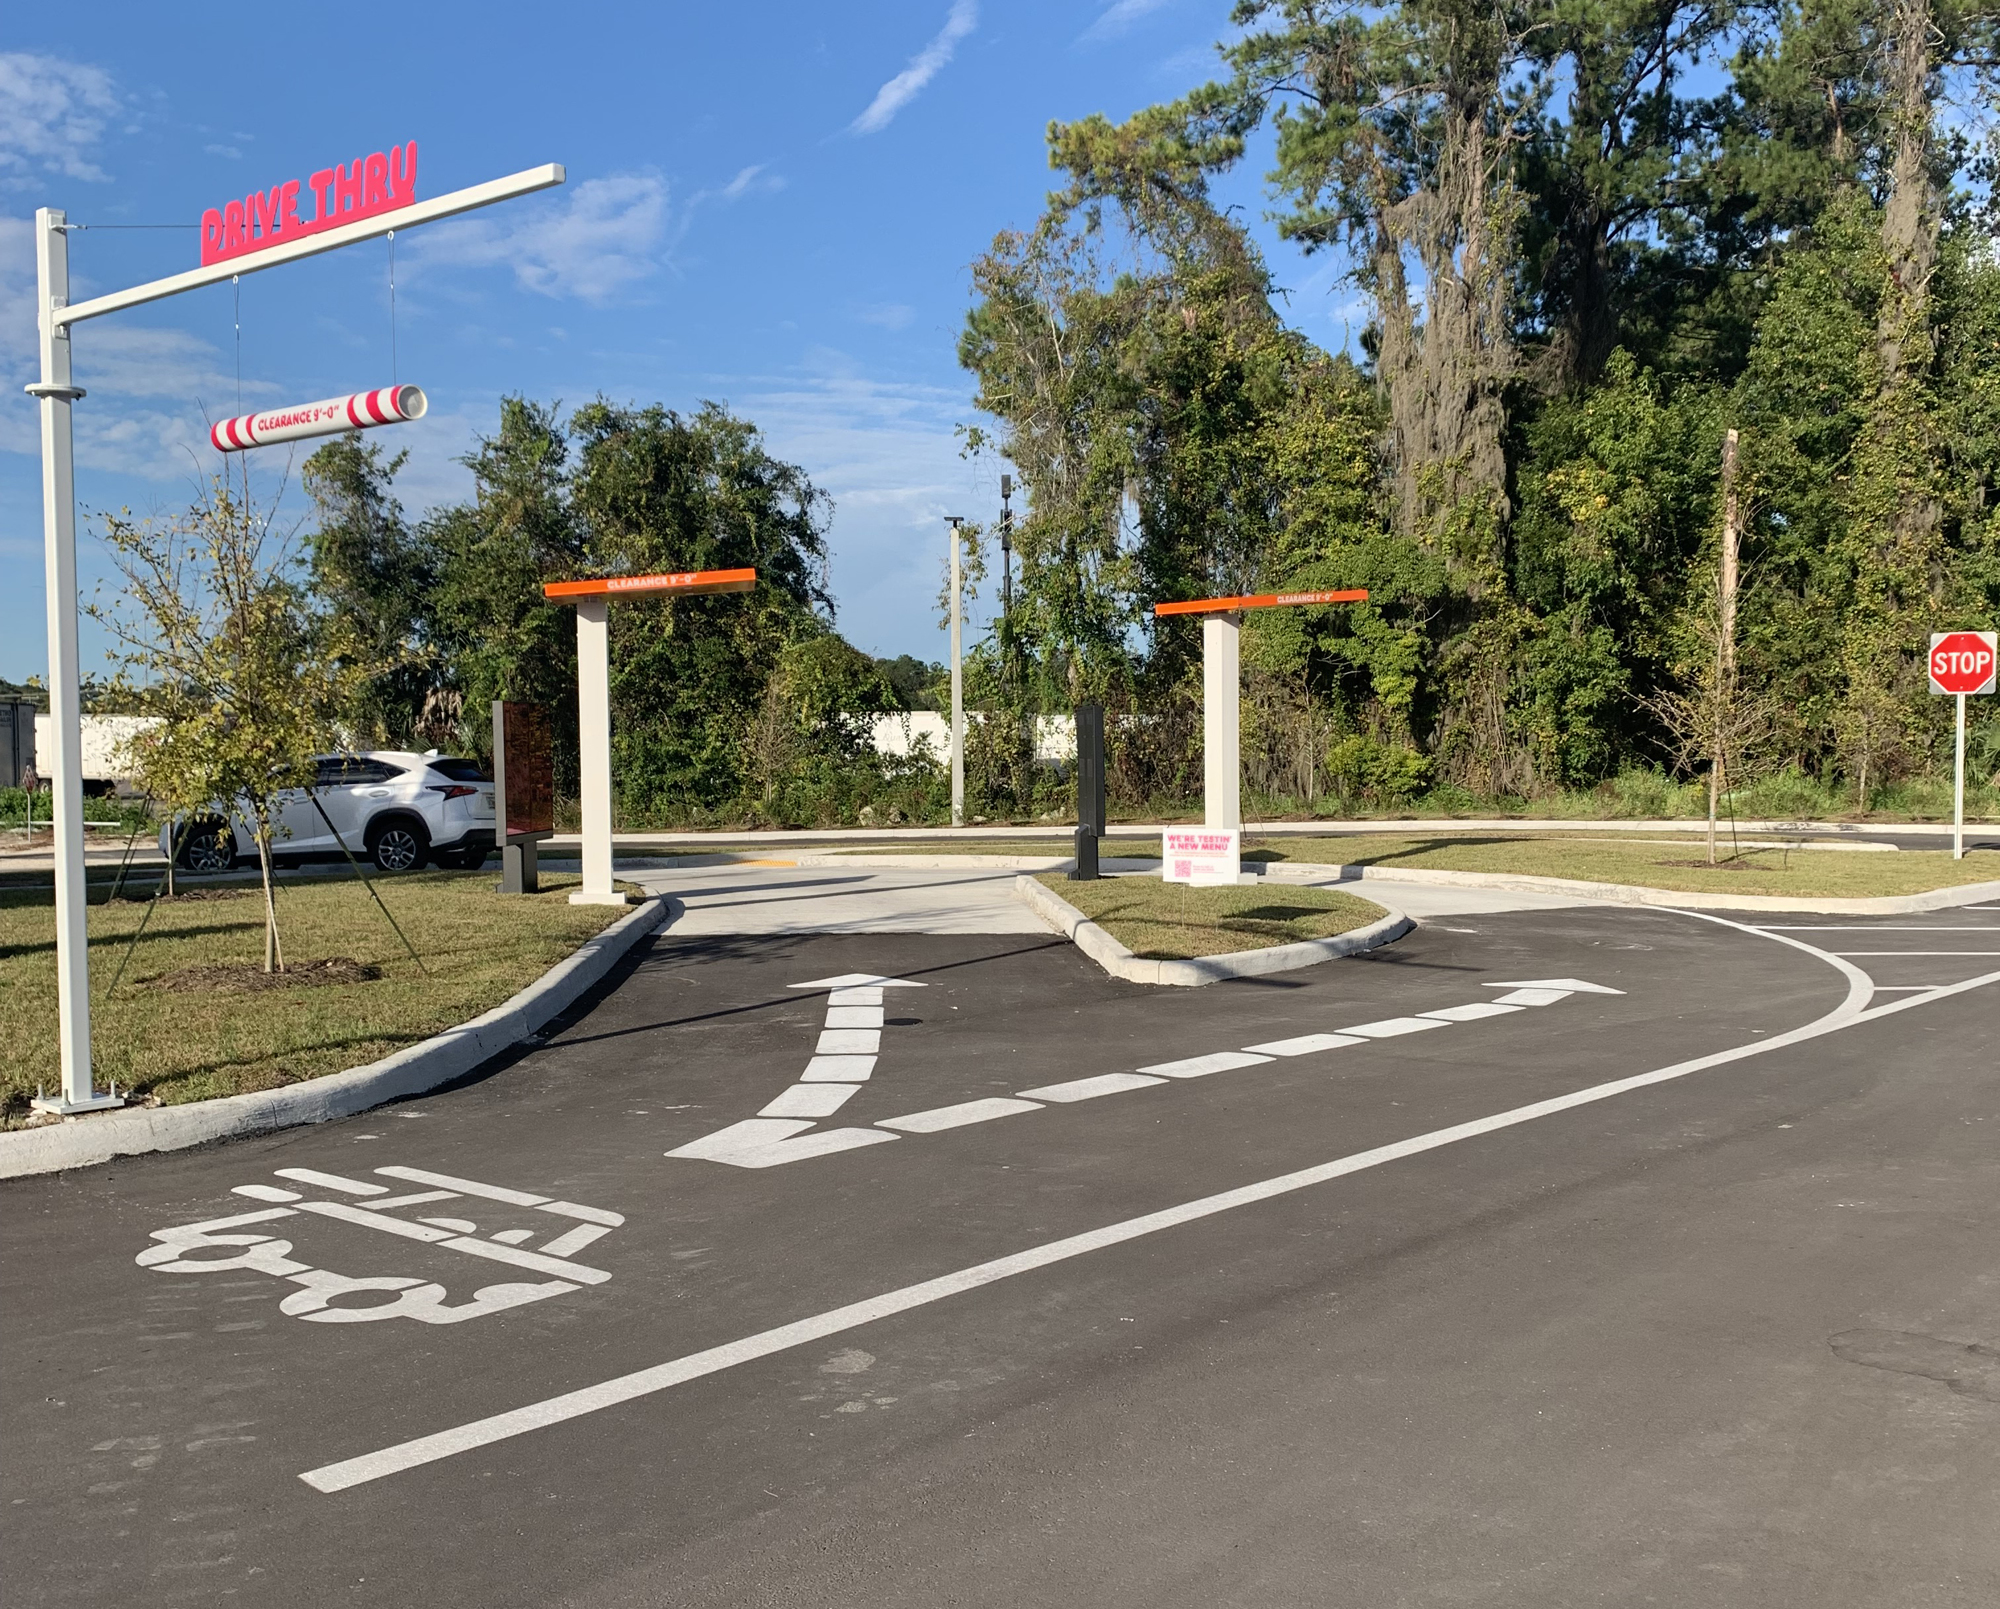 The Dunkin’ GO is the company's first drive-thru-only store in Florida.